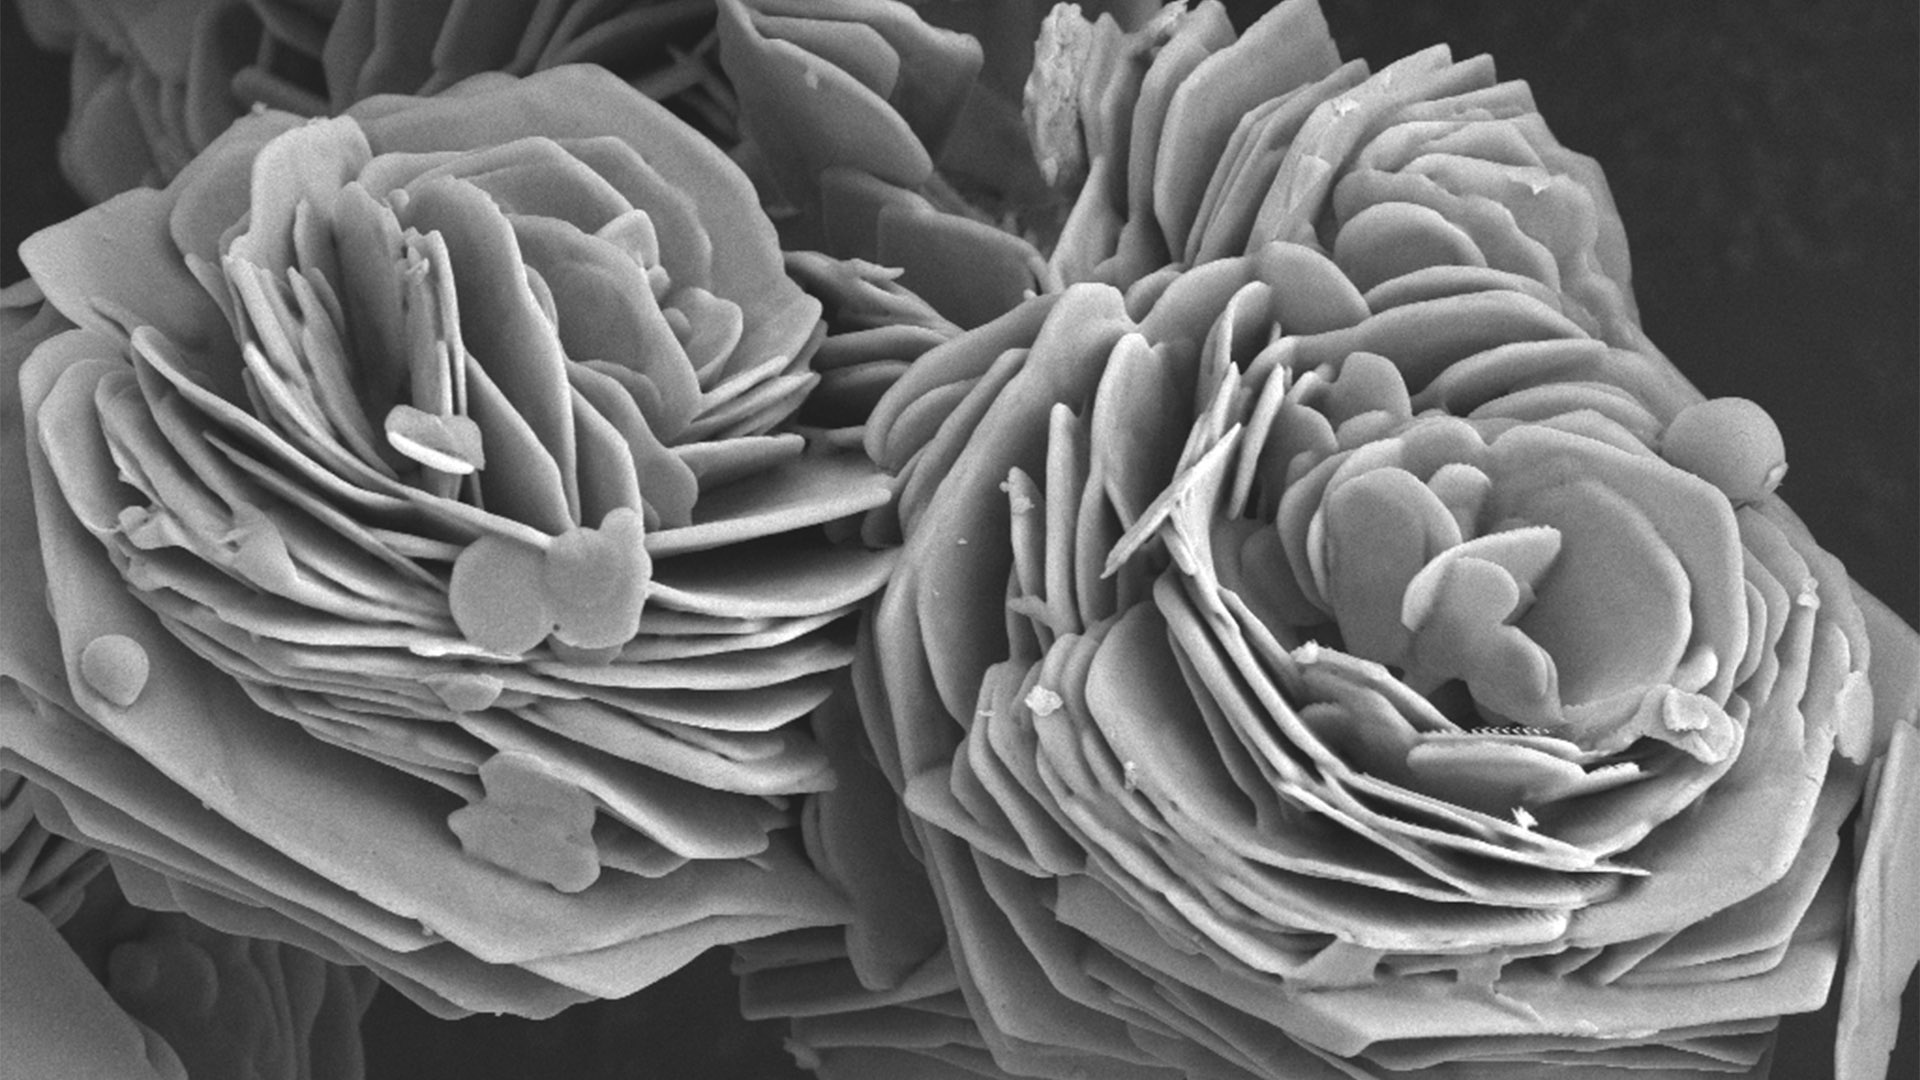 Winning image in the category of Materials Science: "Zinc sulfide semiconductor nanoparticles", acquired with ZEISS GeminiSEM 300. Courtesy of Ü. Bayram, Abdullah Gül University, Kayseri, Turkey